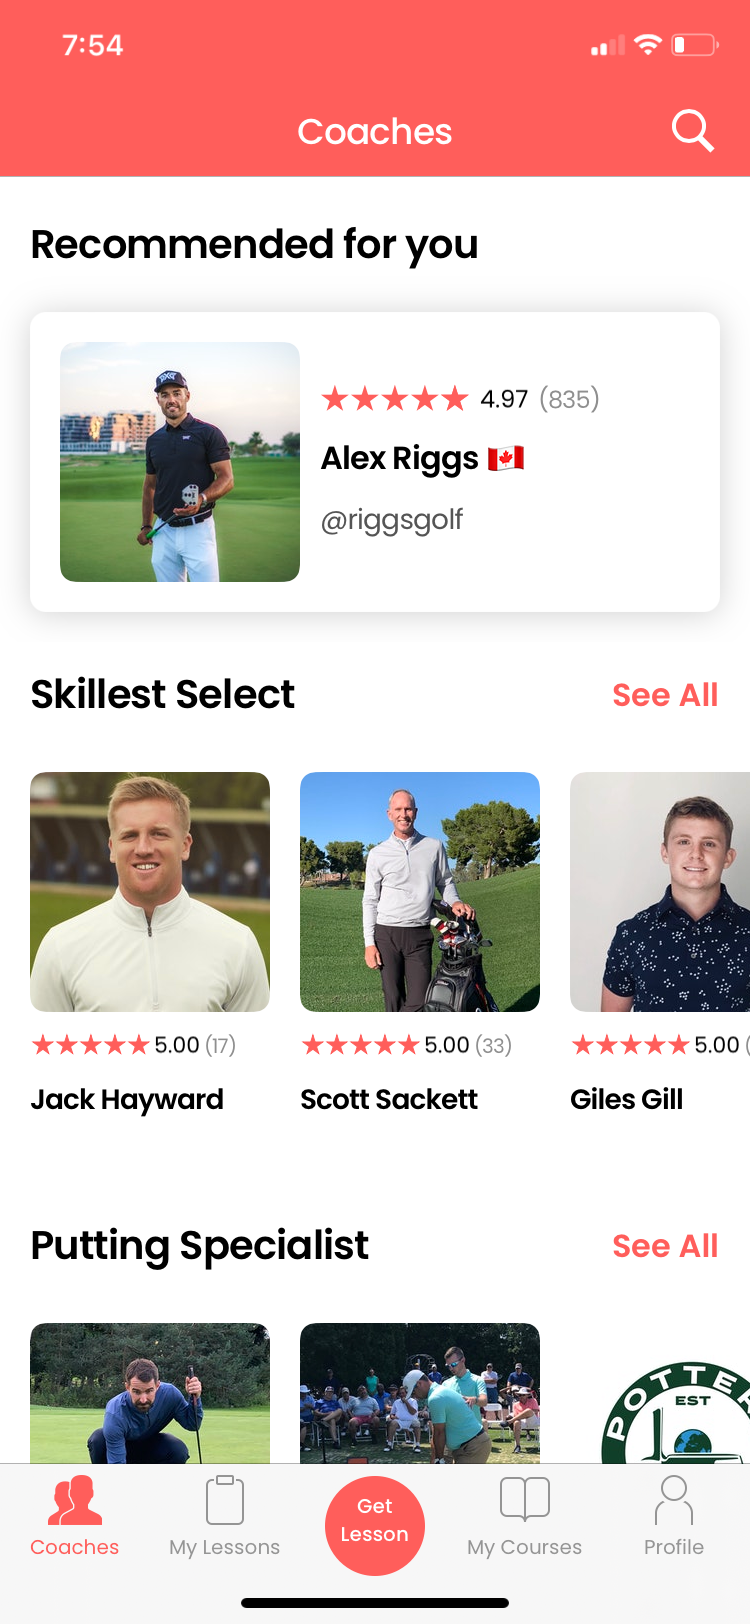 Skillest coaches page